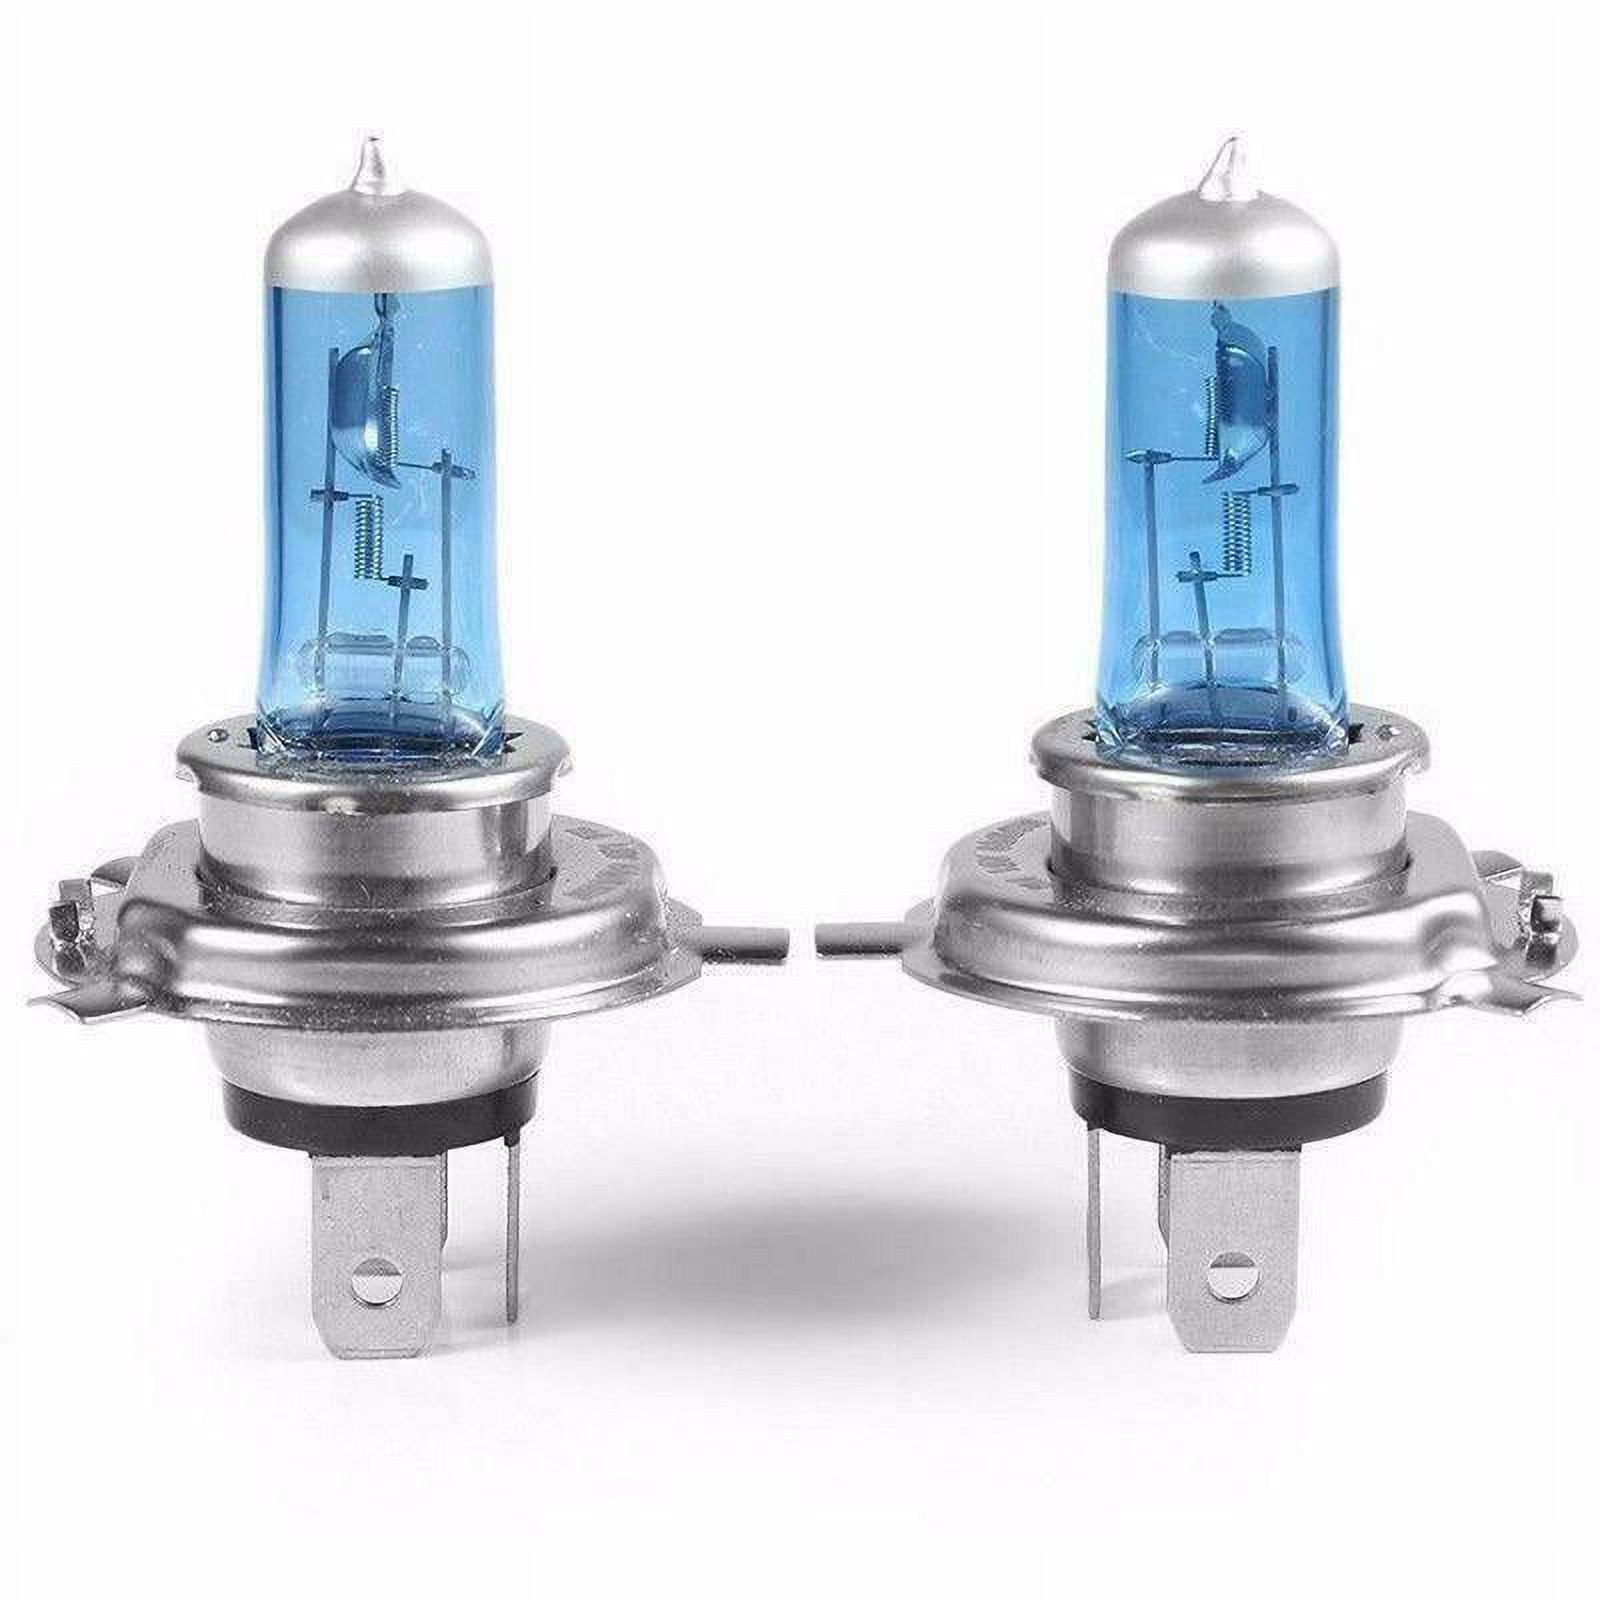 Lindmeyers 2 x H4/9003/HB2 Halogen 60/55W 12V Dual-Beam LowithHigh Headlight  Replacement Bulbs 